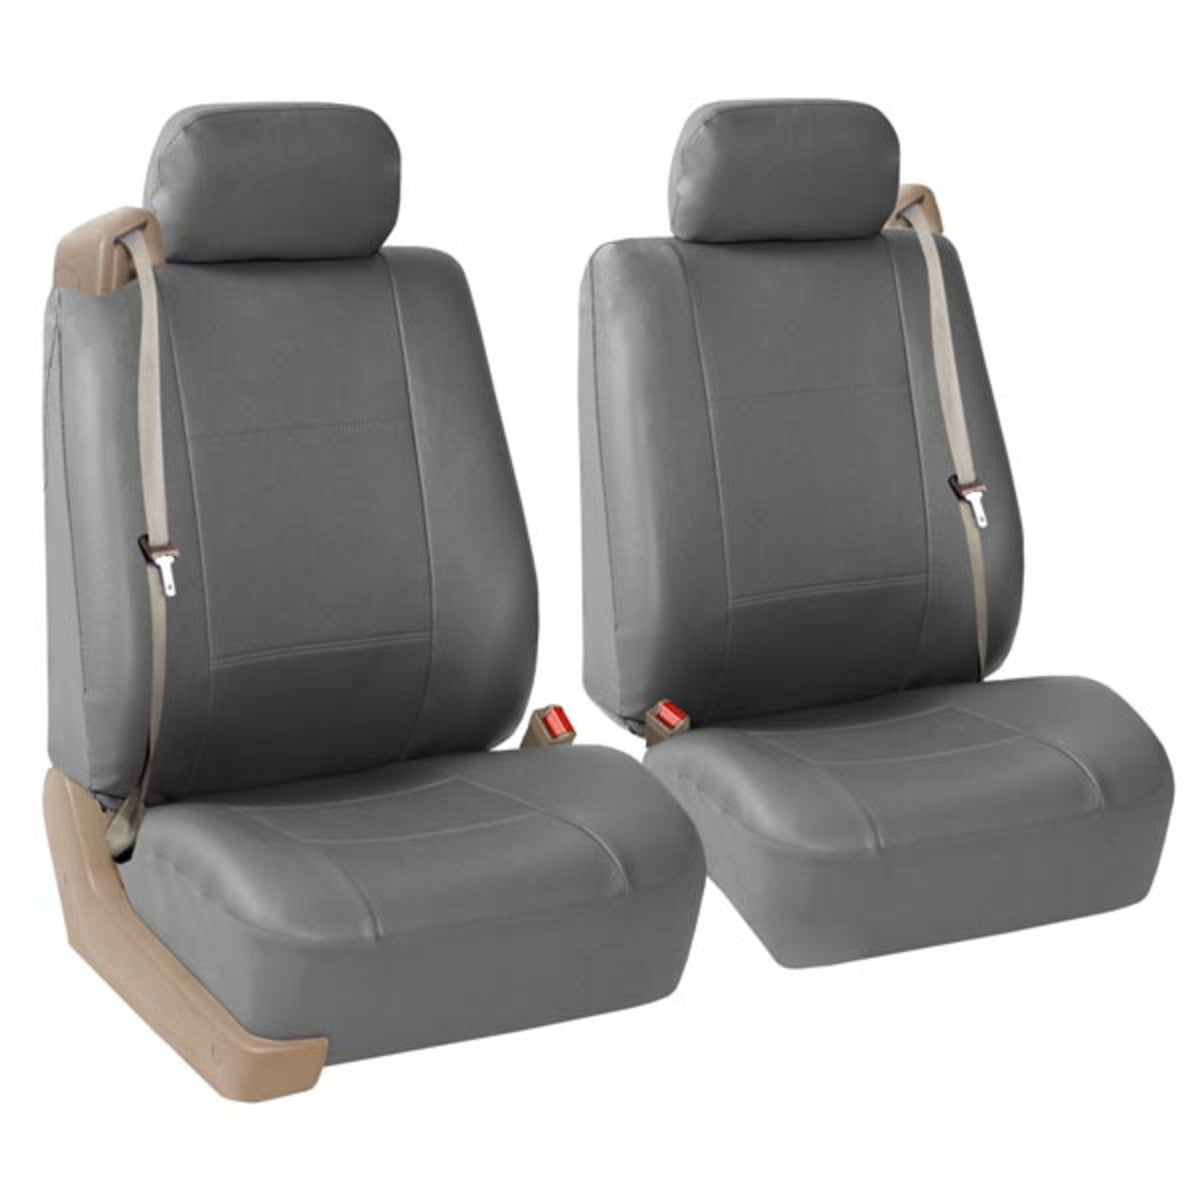 Built-in Seat Belt Compatible PU Leather Seat Covers Gray